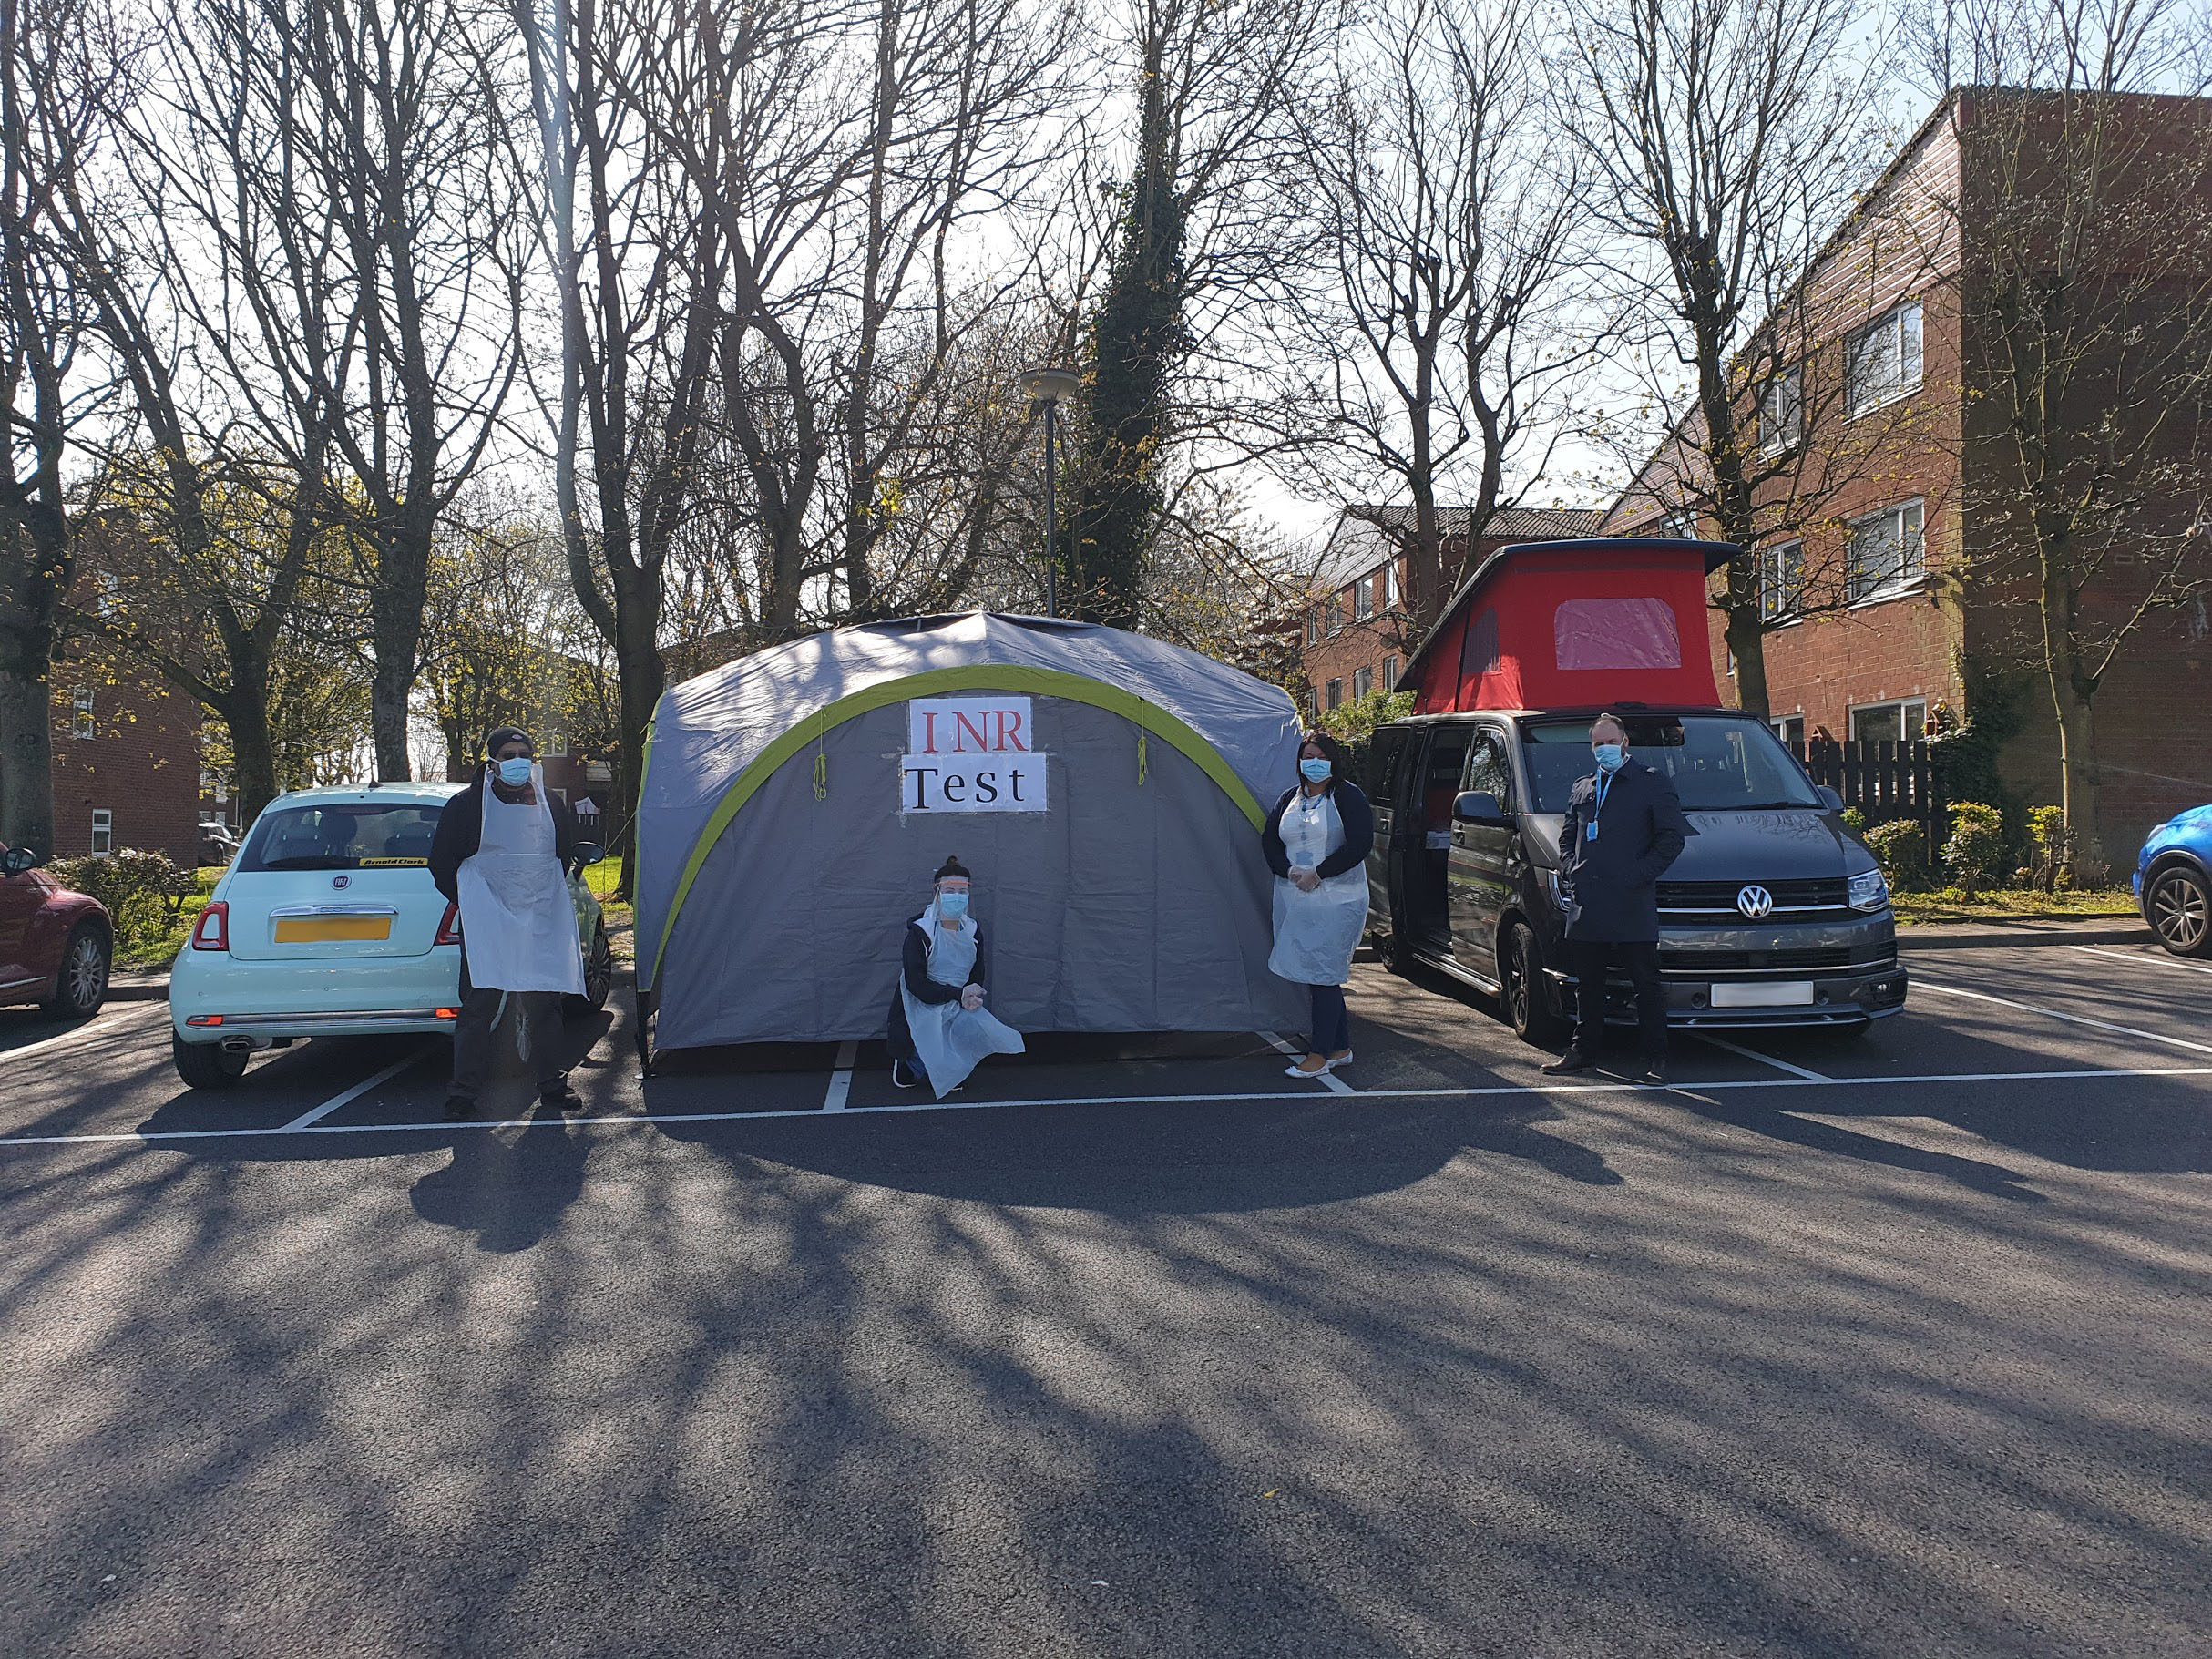 Dr Biswas set up drive through service in the car park of one of the locations using the LumiraDx Platform, LumiraDx INR Test and INRstar.